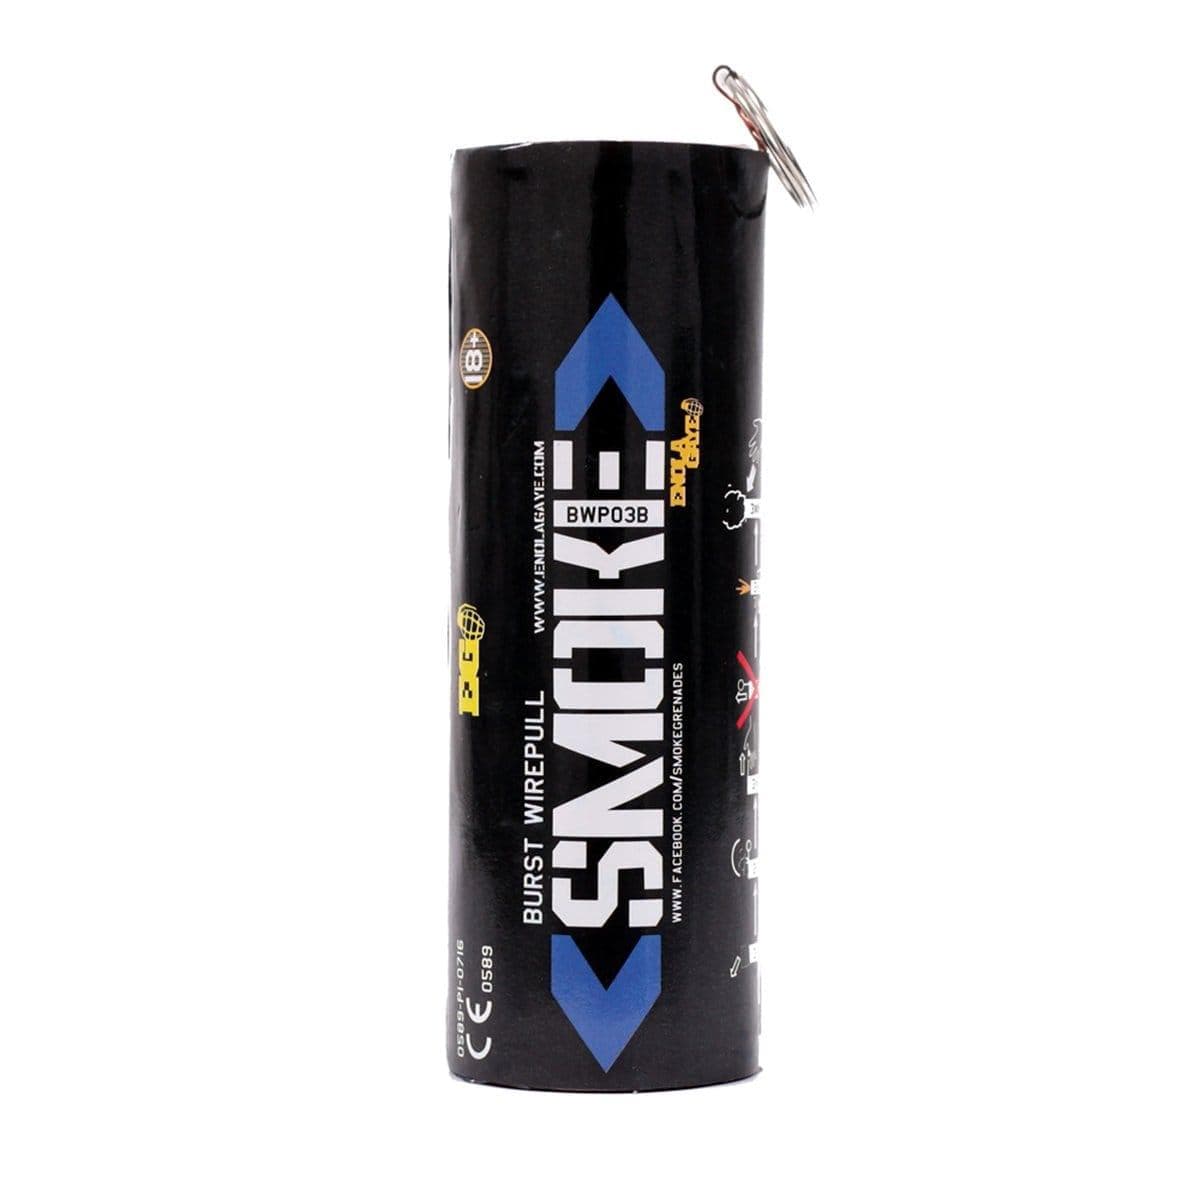 Buy Fireworks Burst Smoke - Blue sold at Party Expert